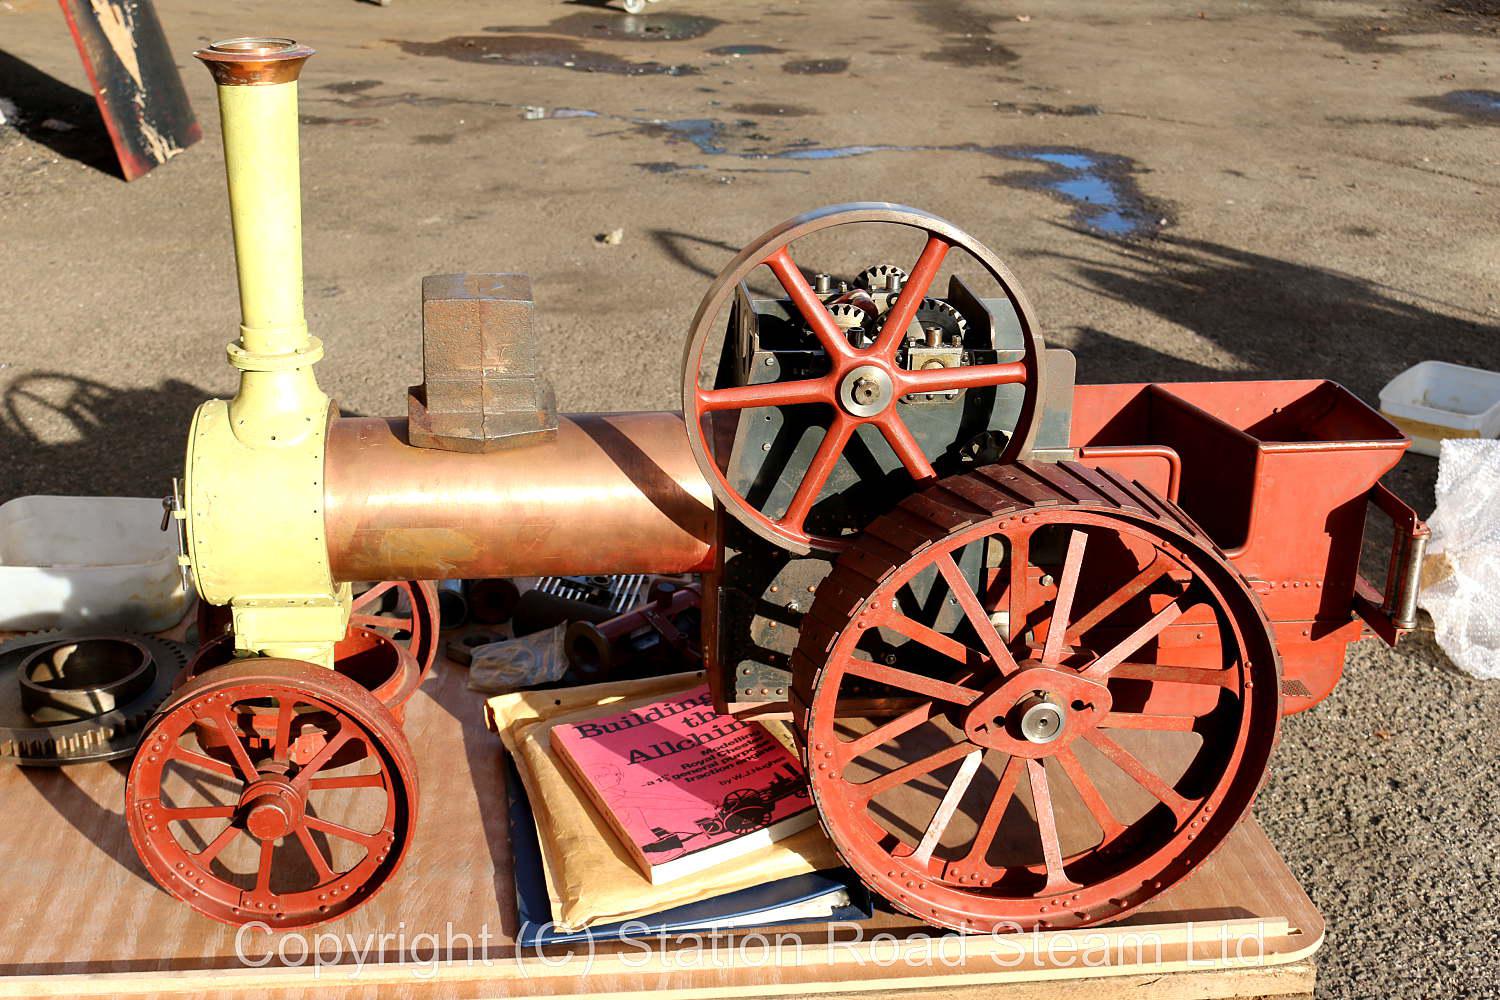 Part-built 2 1/4 inch scale Allchin agricultural engine